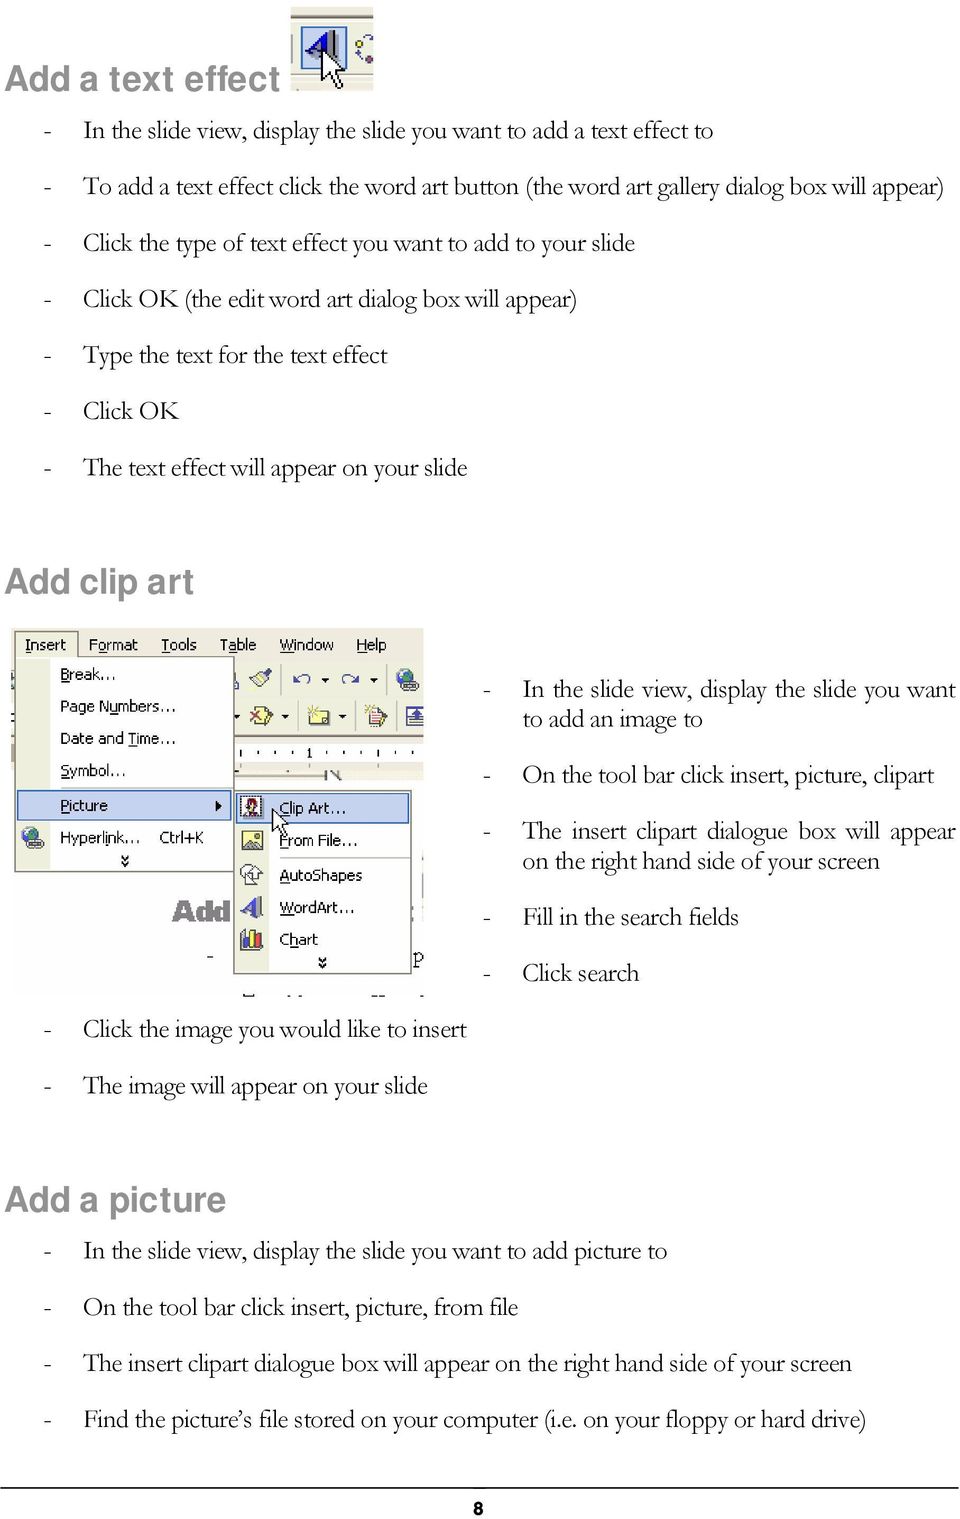 clip art - Click the image you would like to insert - The image will appear on your slide - In the slide view, display the slide you want to add an image to - On the tool bar click insert, picture,